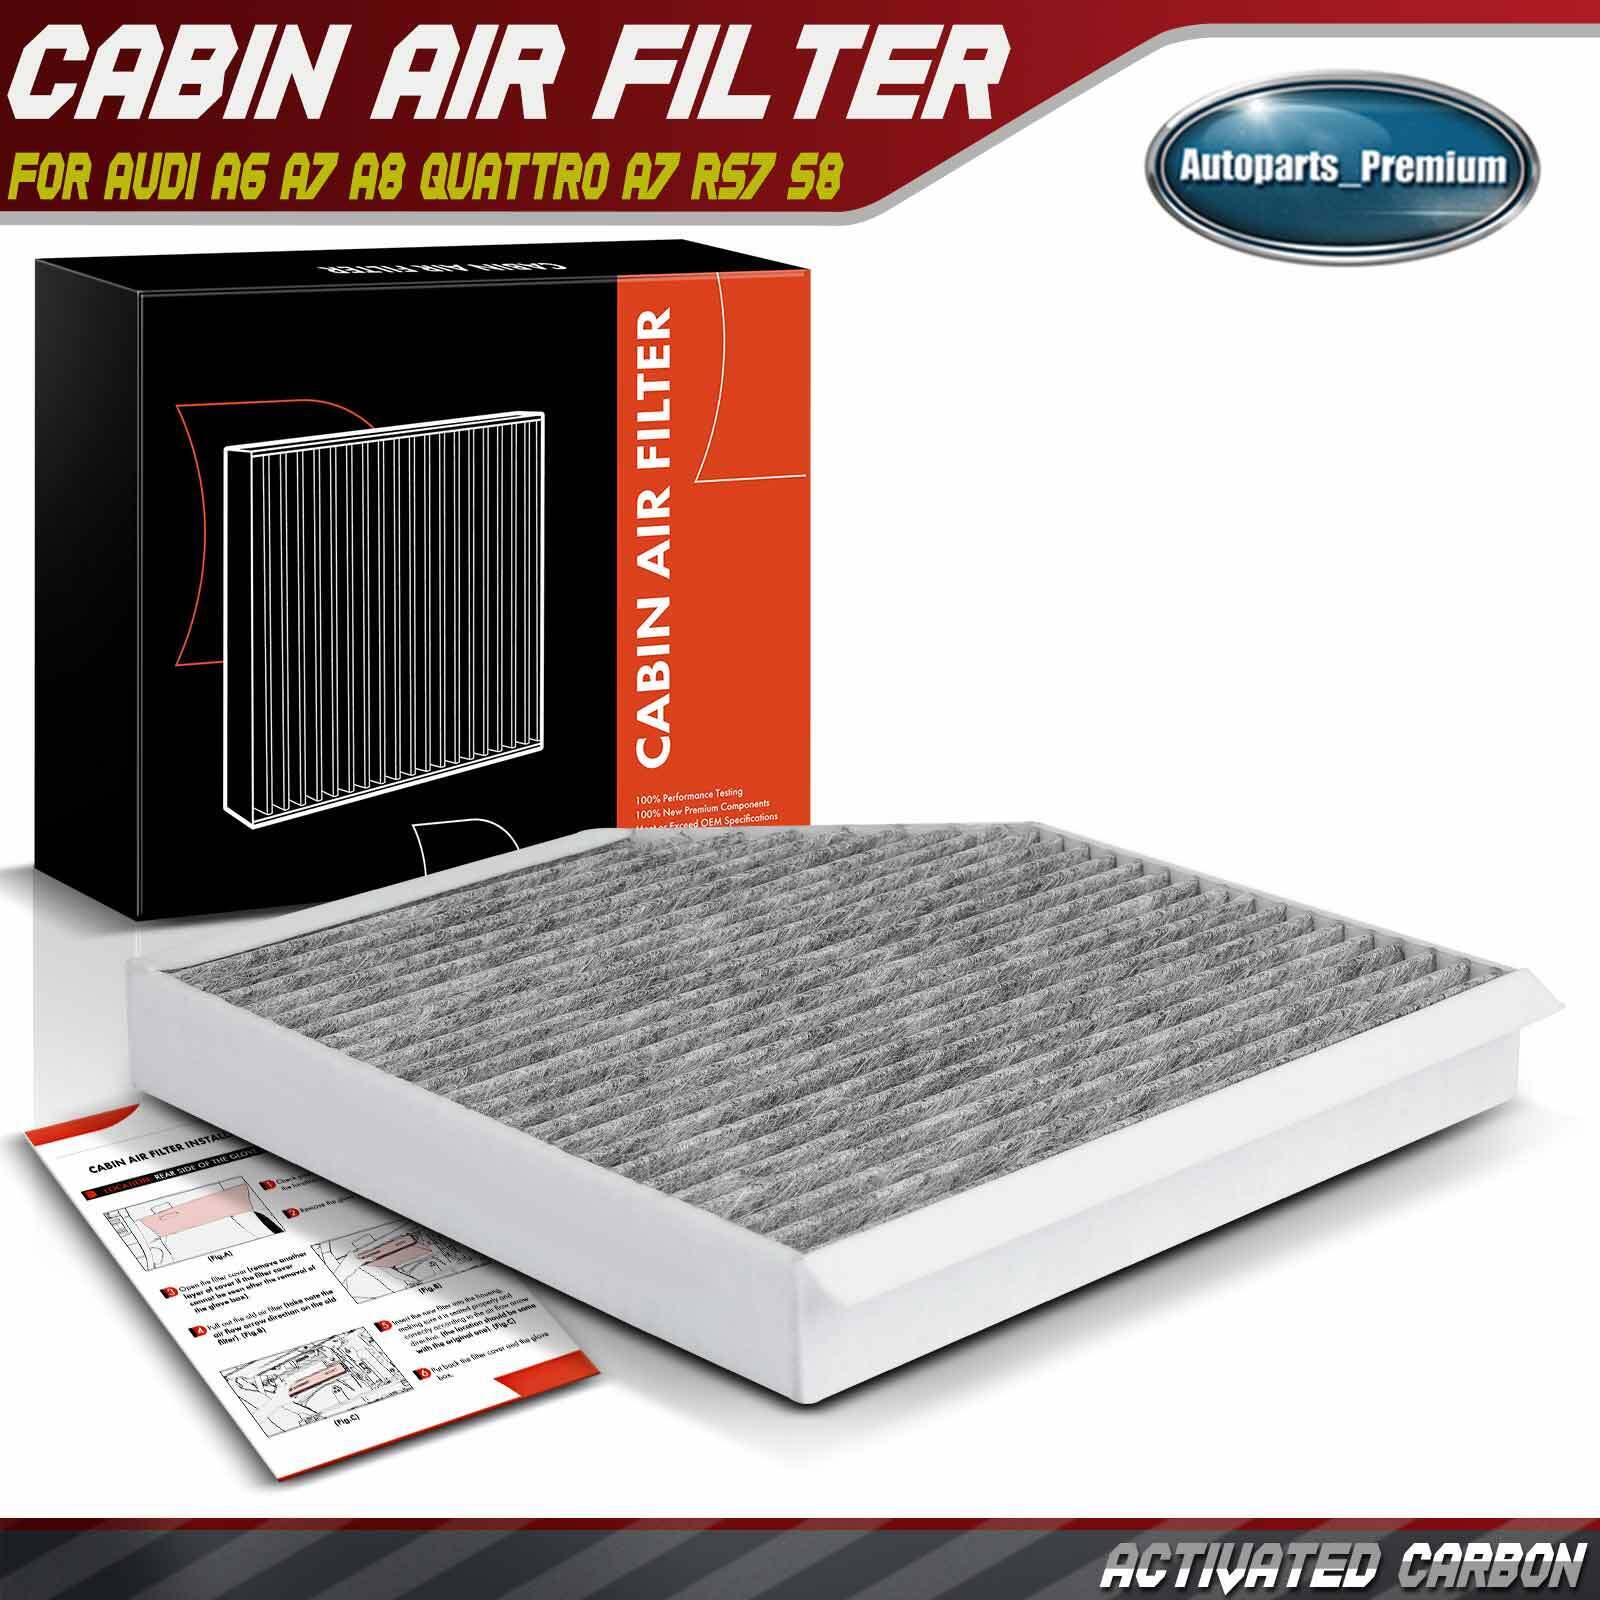 Activated Carbon Cabin Air Filter for Audi A6 A7 Quattro A8 Quattro RS7 S7 S6 S8